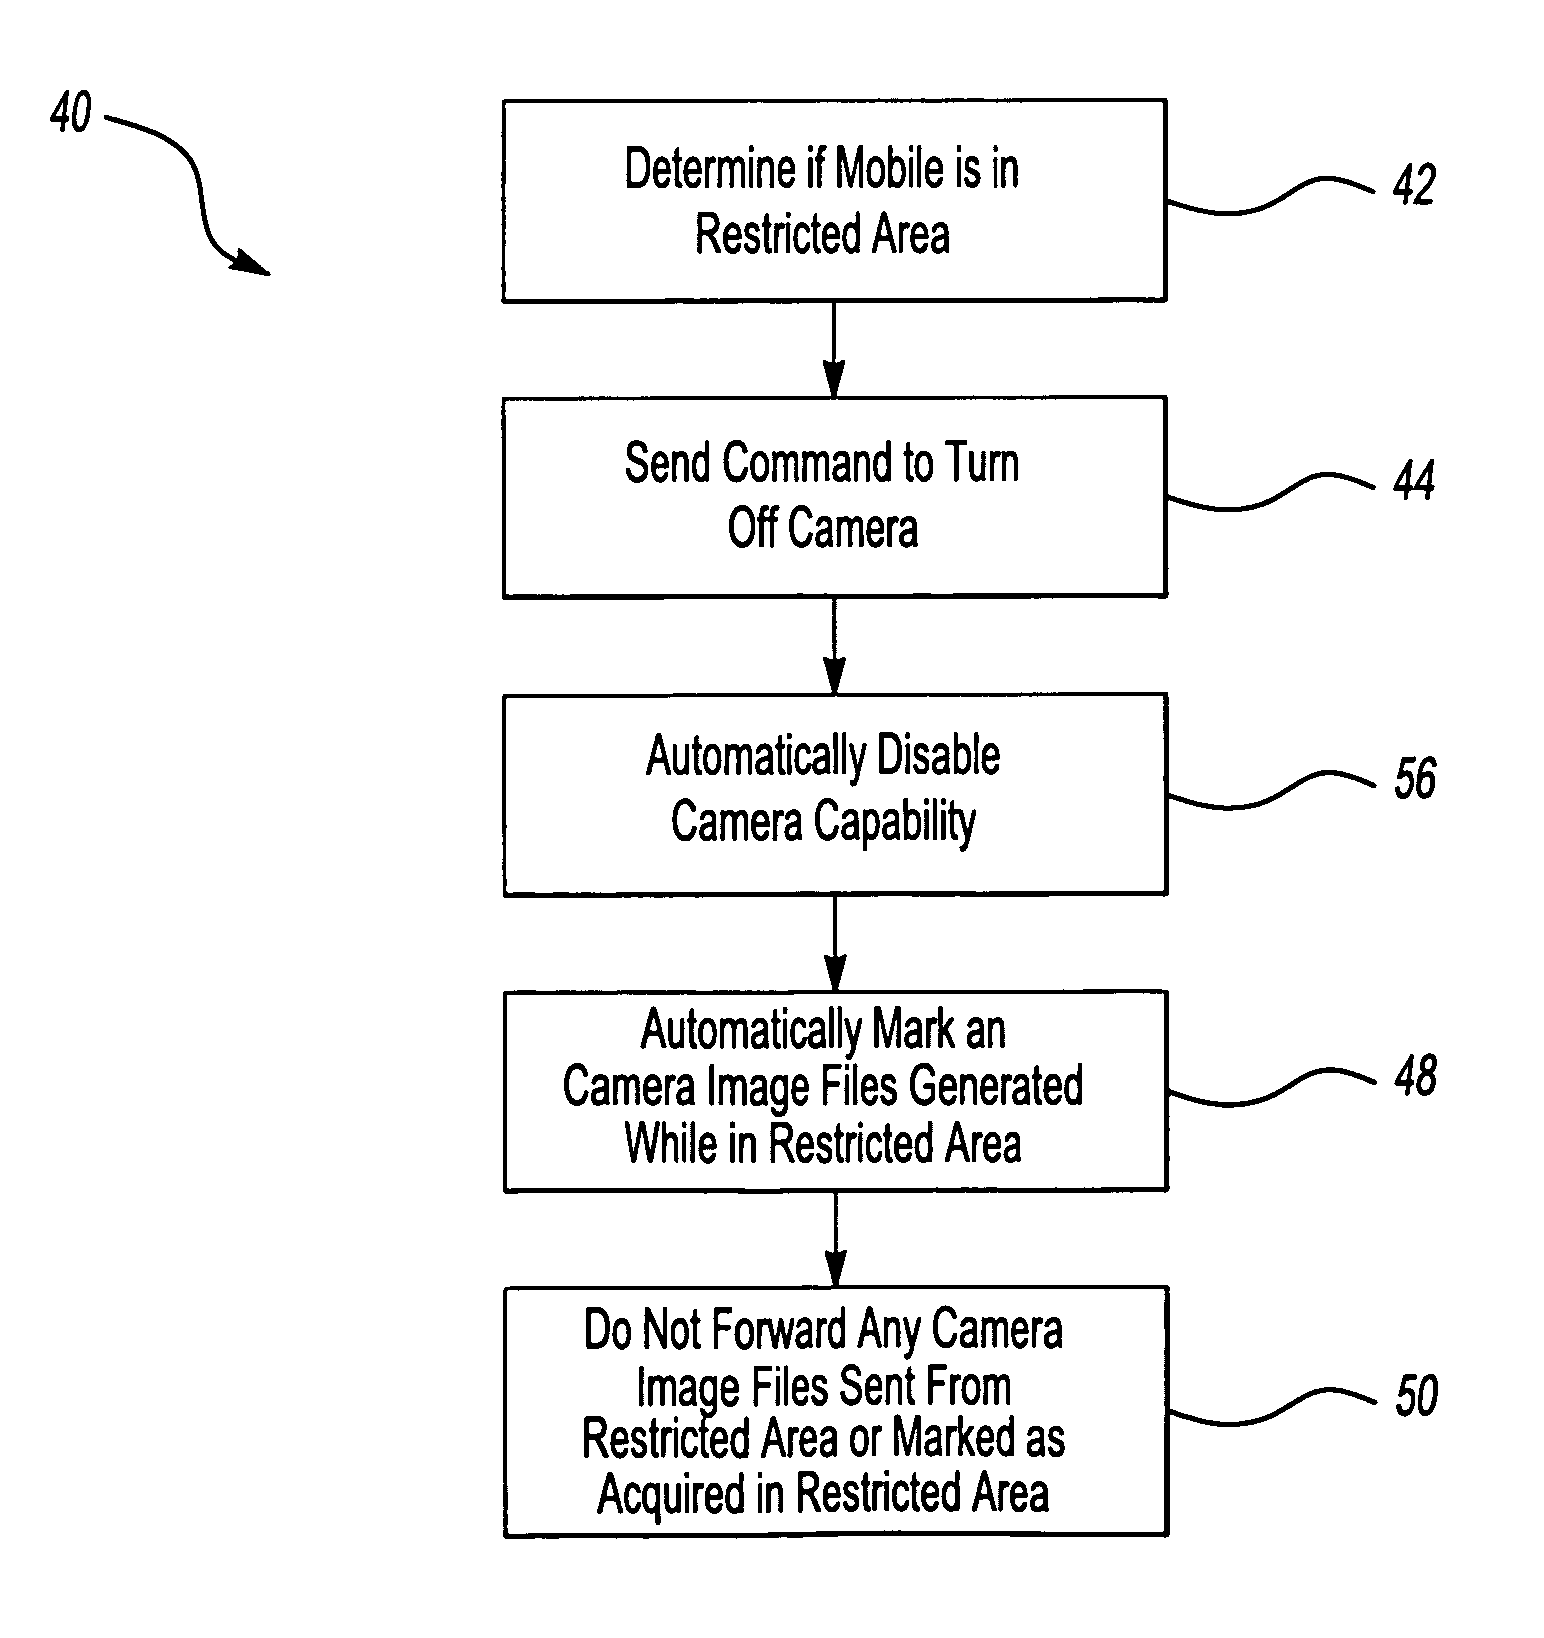 Controlling wireless communication devices with media recording capabilities